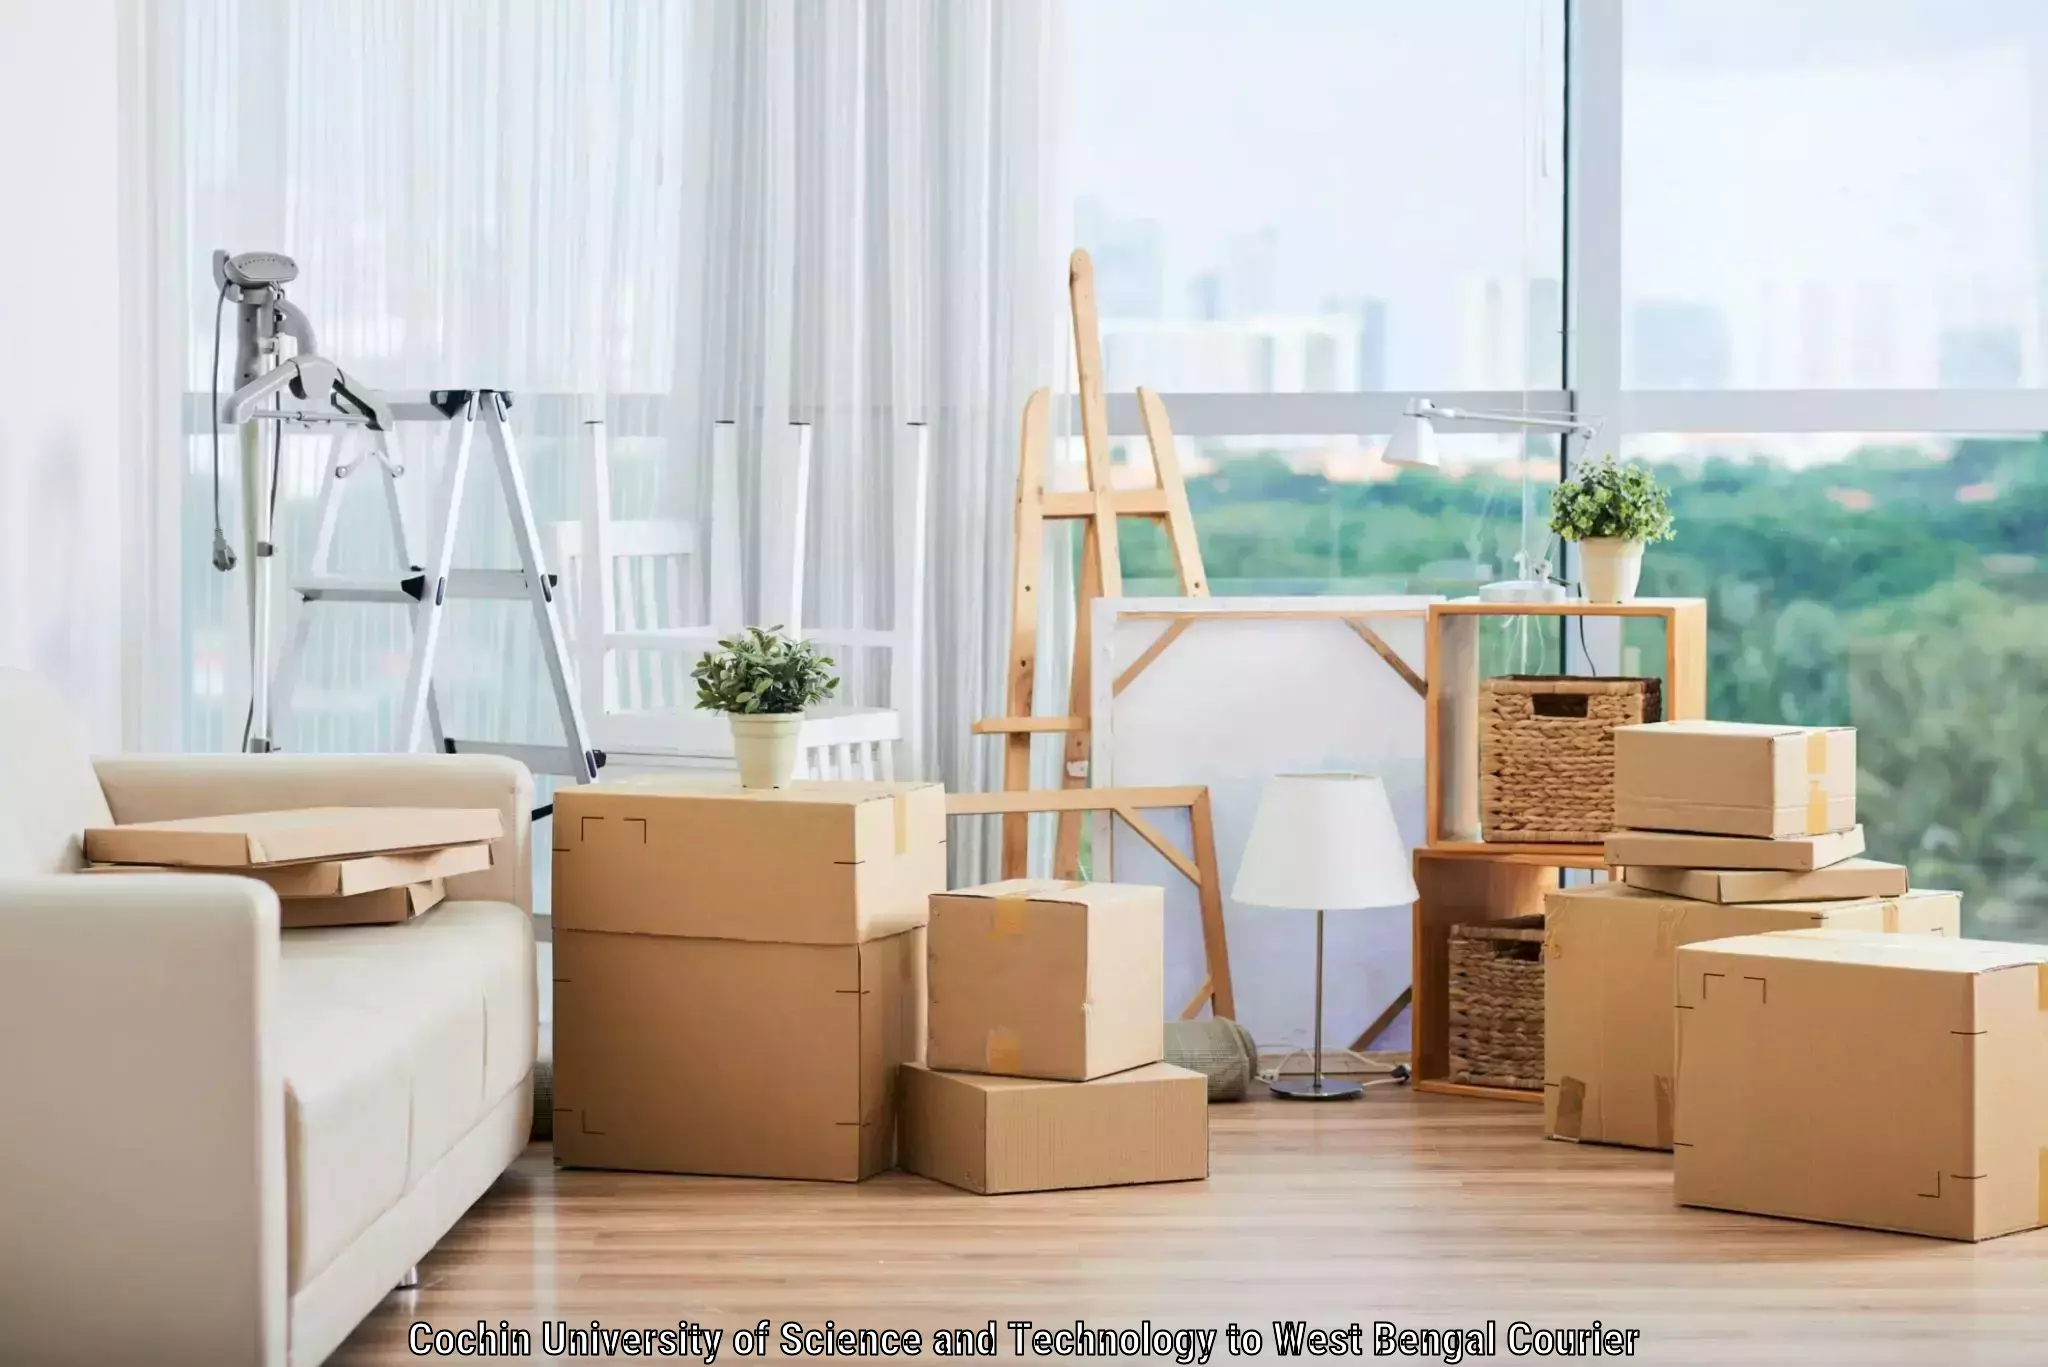 Trusted moving company Cochin University of Science and Technology to West Bengal